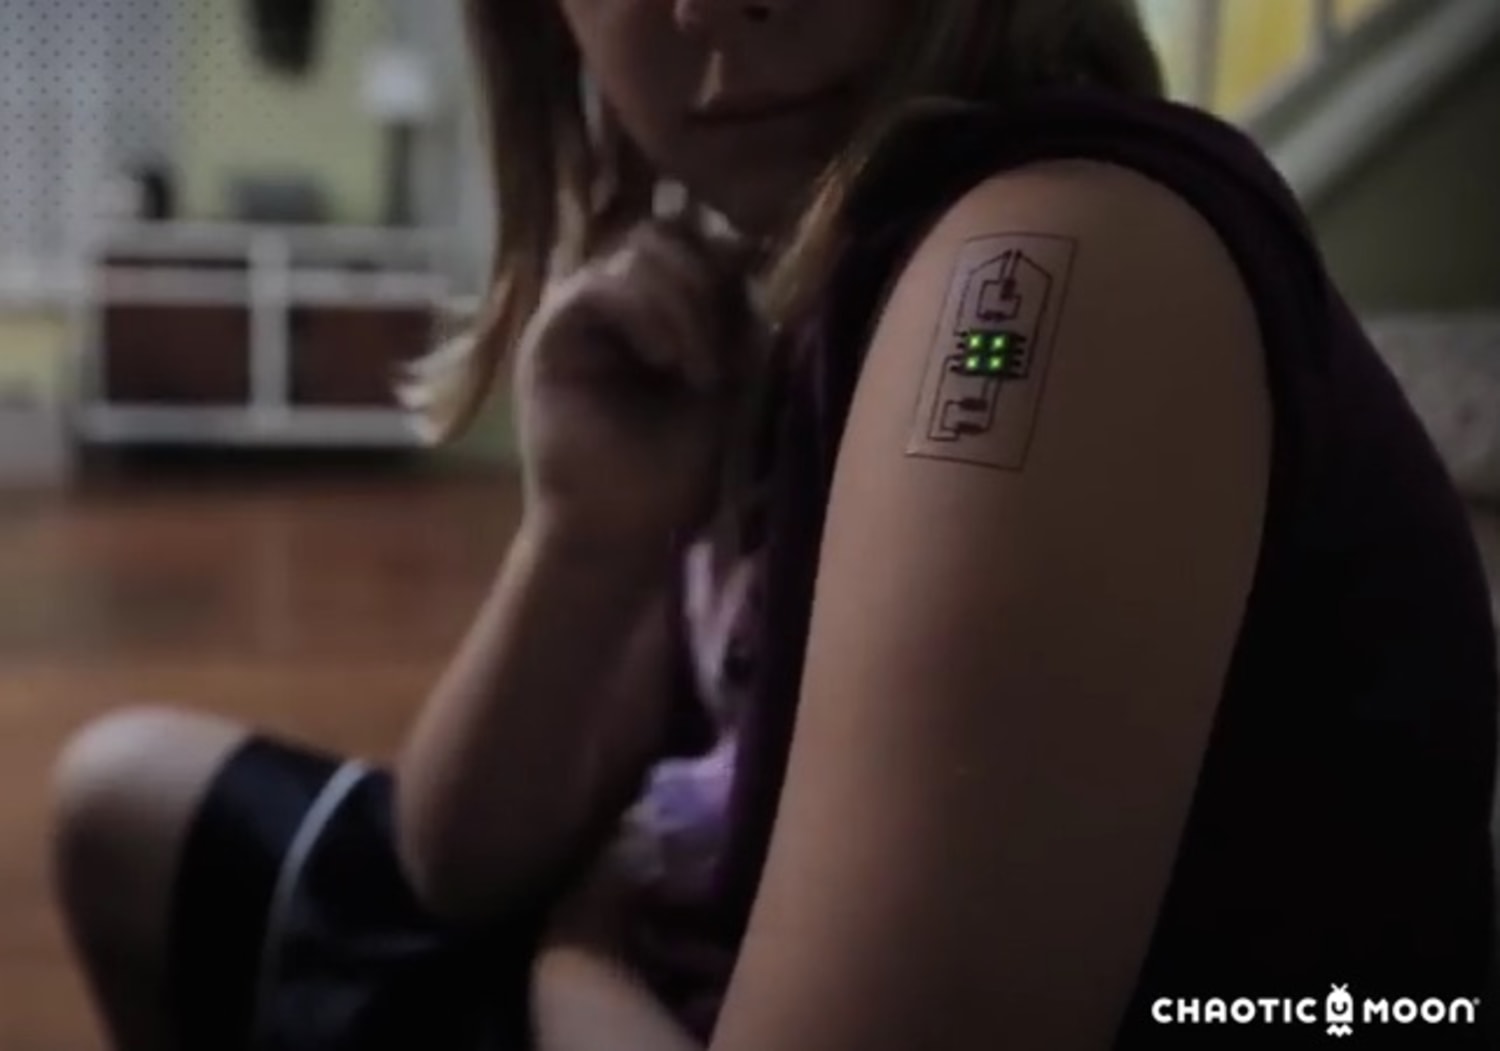 Temp tech tattoos can monitor your health and location  Engadget